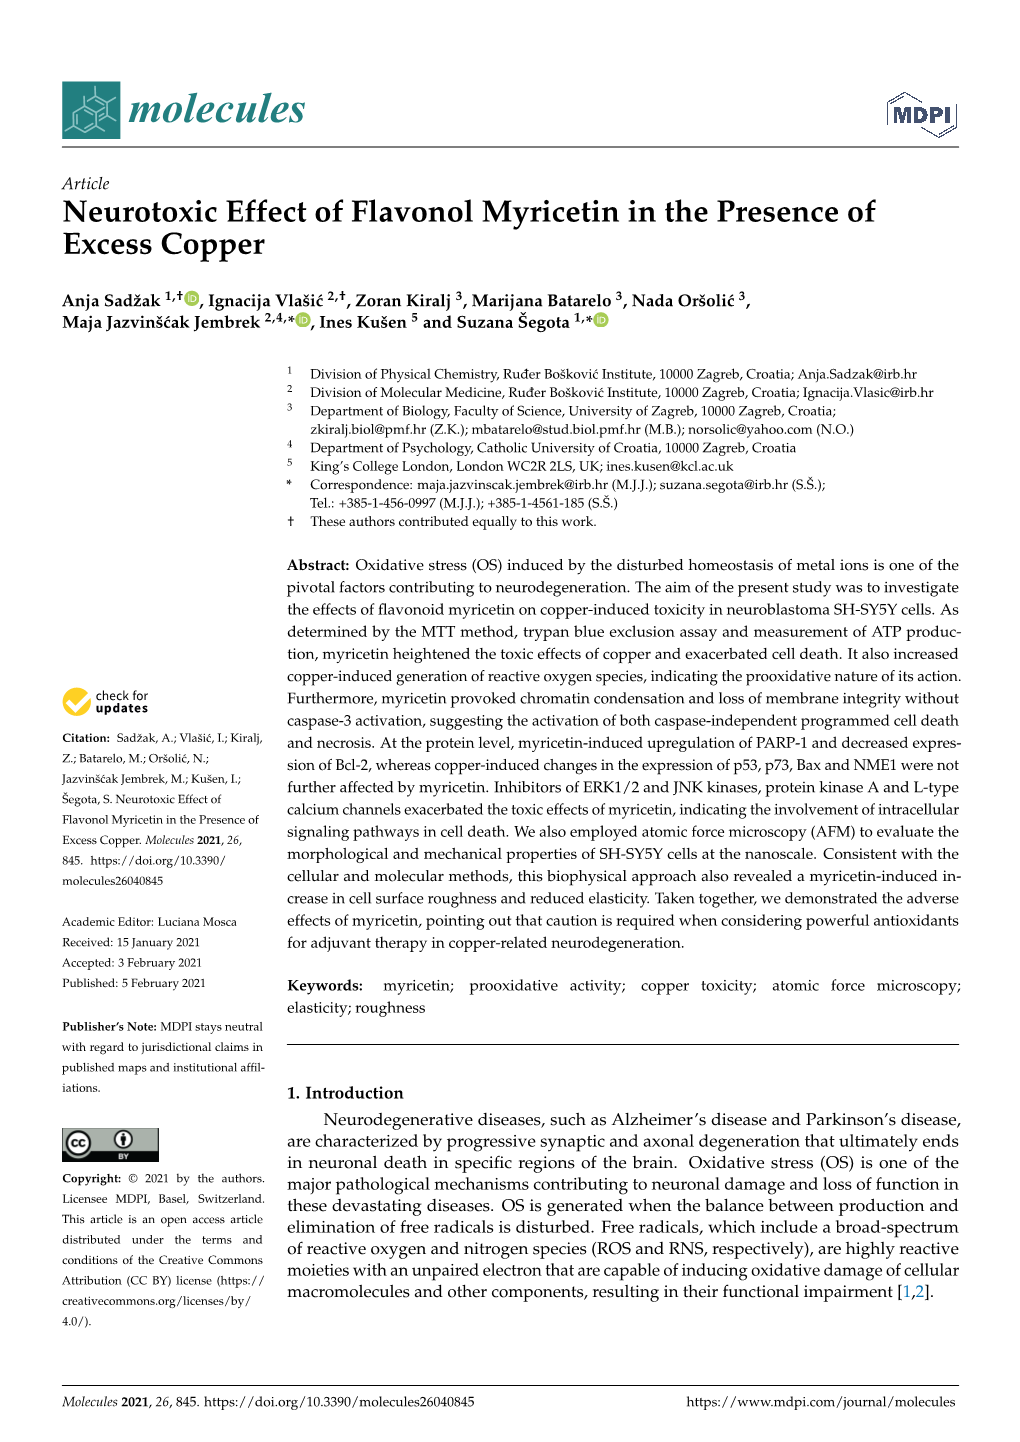 Neurotoxic Effect of Flavonol Myricetin in the Presence of Excess Copper